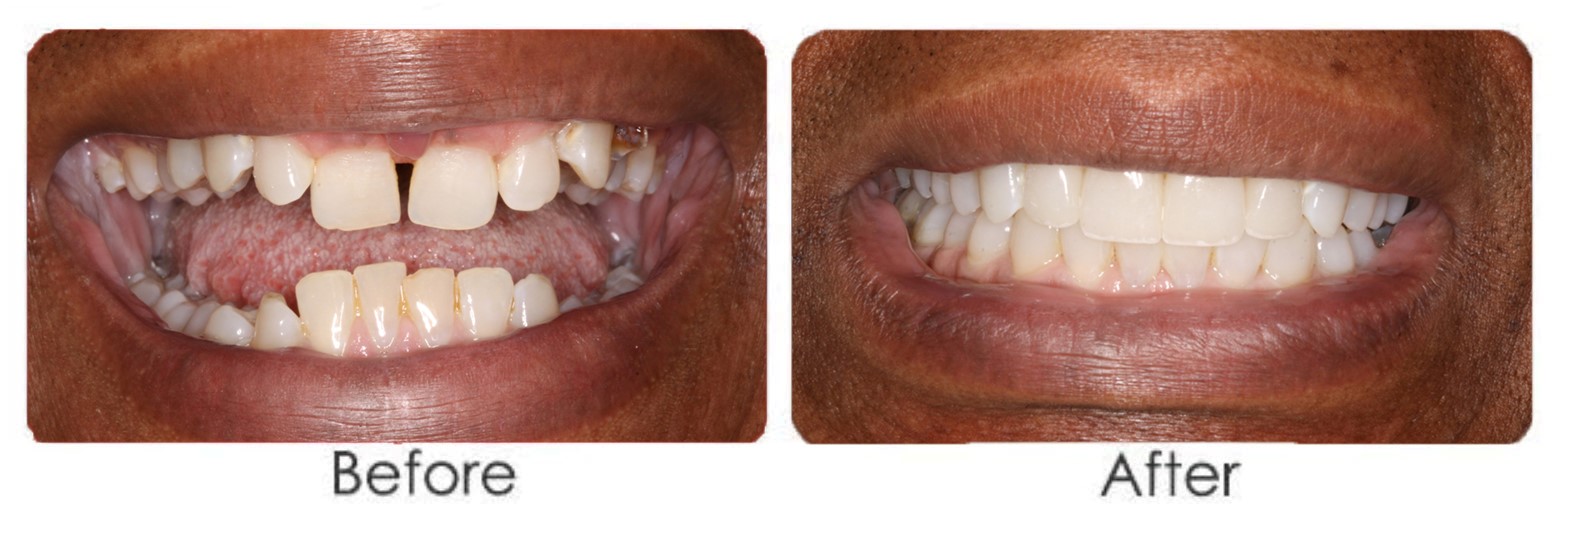 Orthodontics - Invisalign Before & After - Orthodontic therapy Ismile